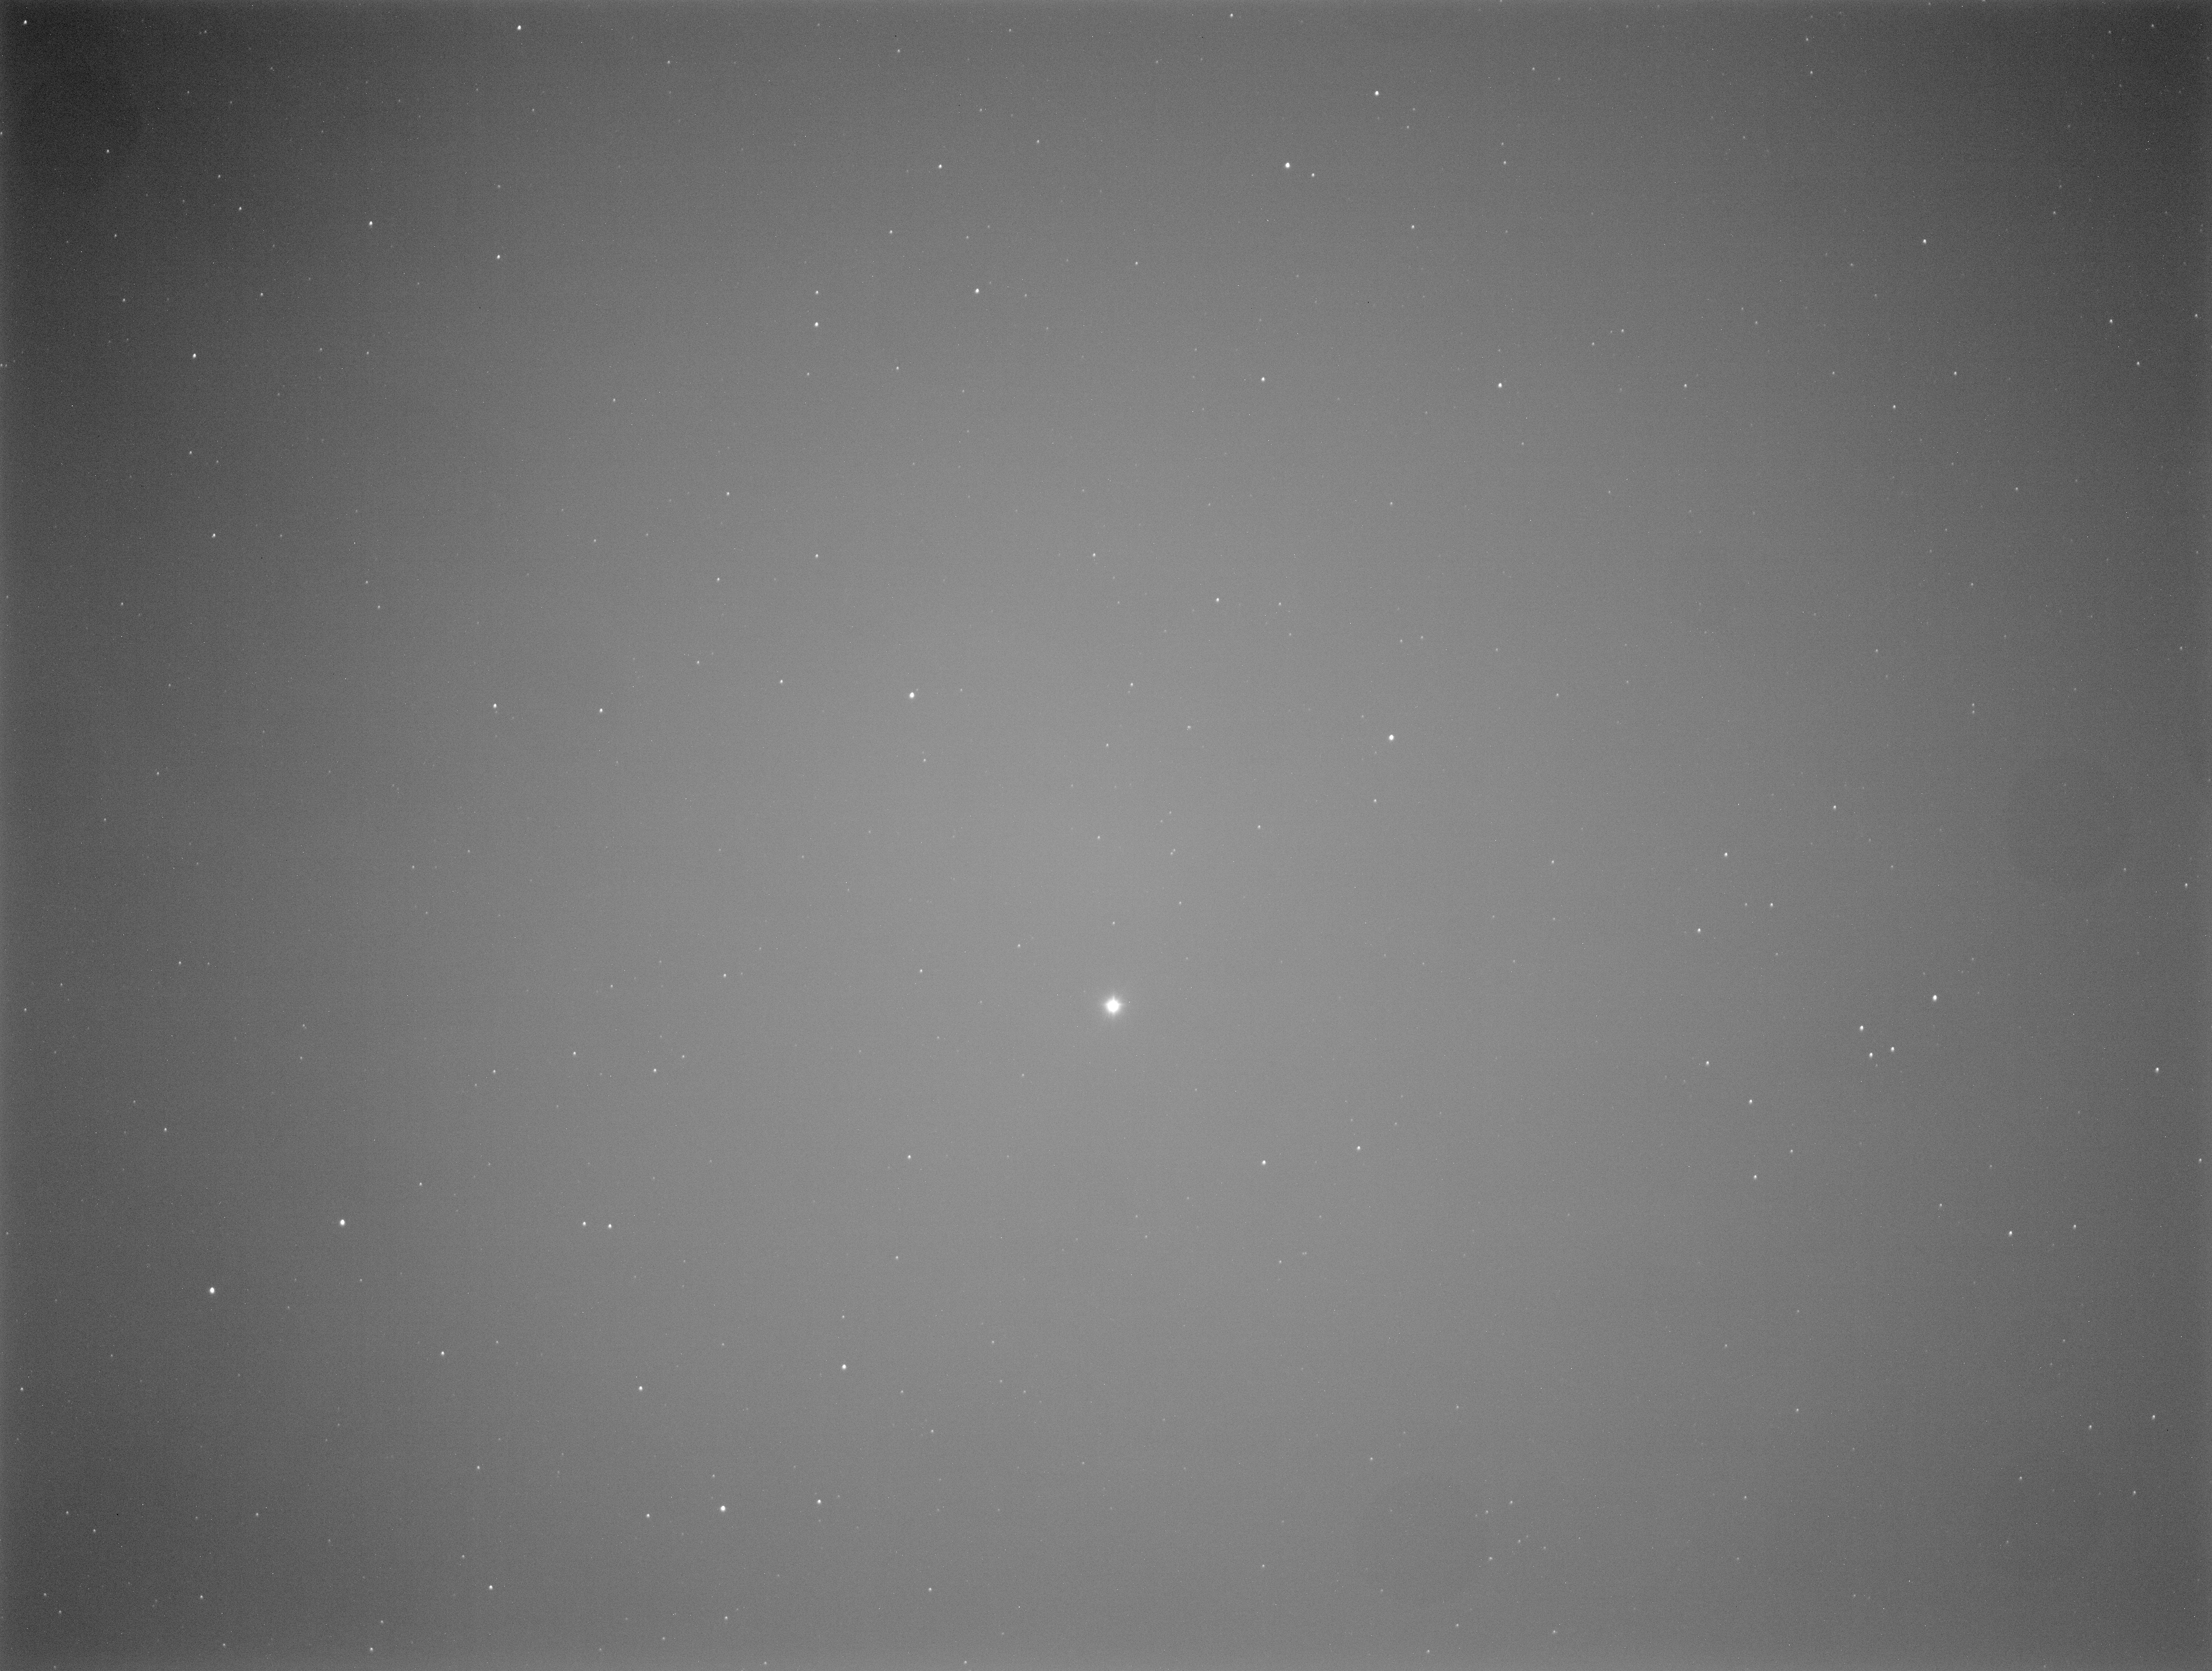 CCD Image 279-5MINGUIDER01web.png